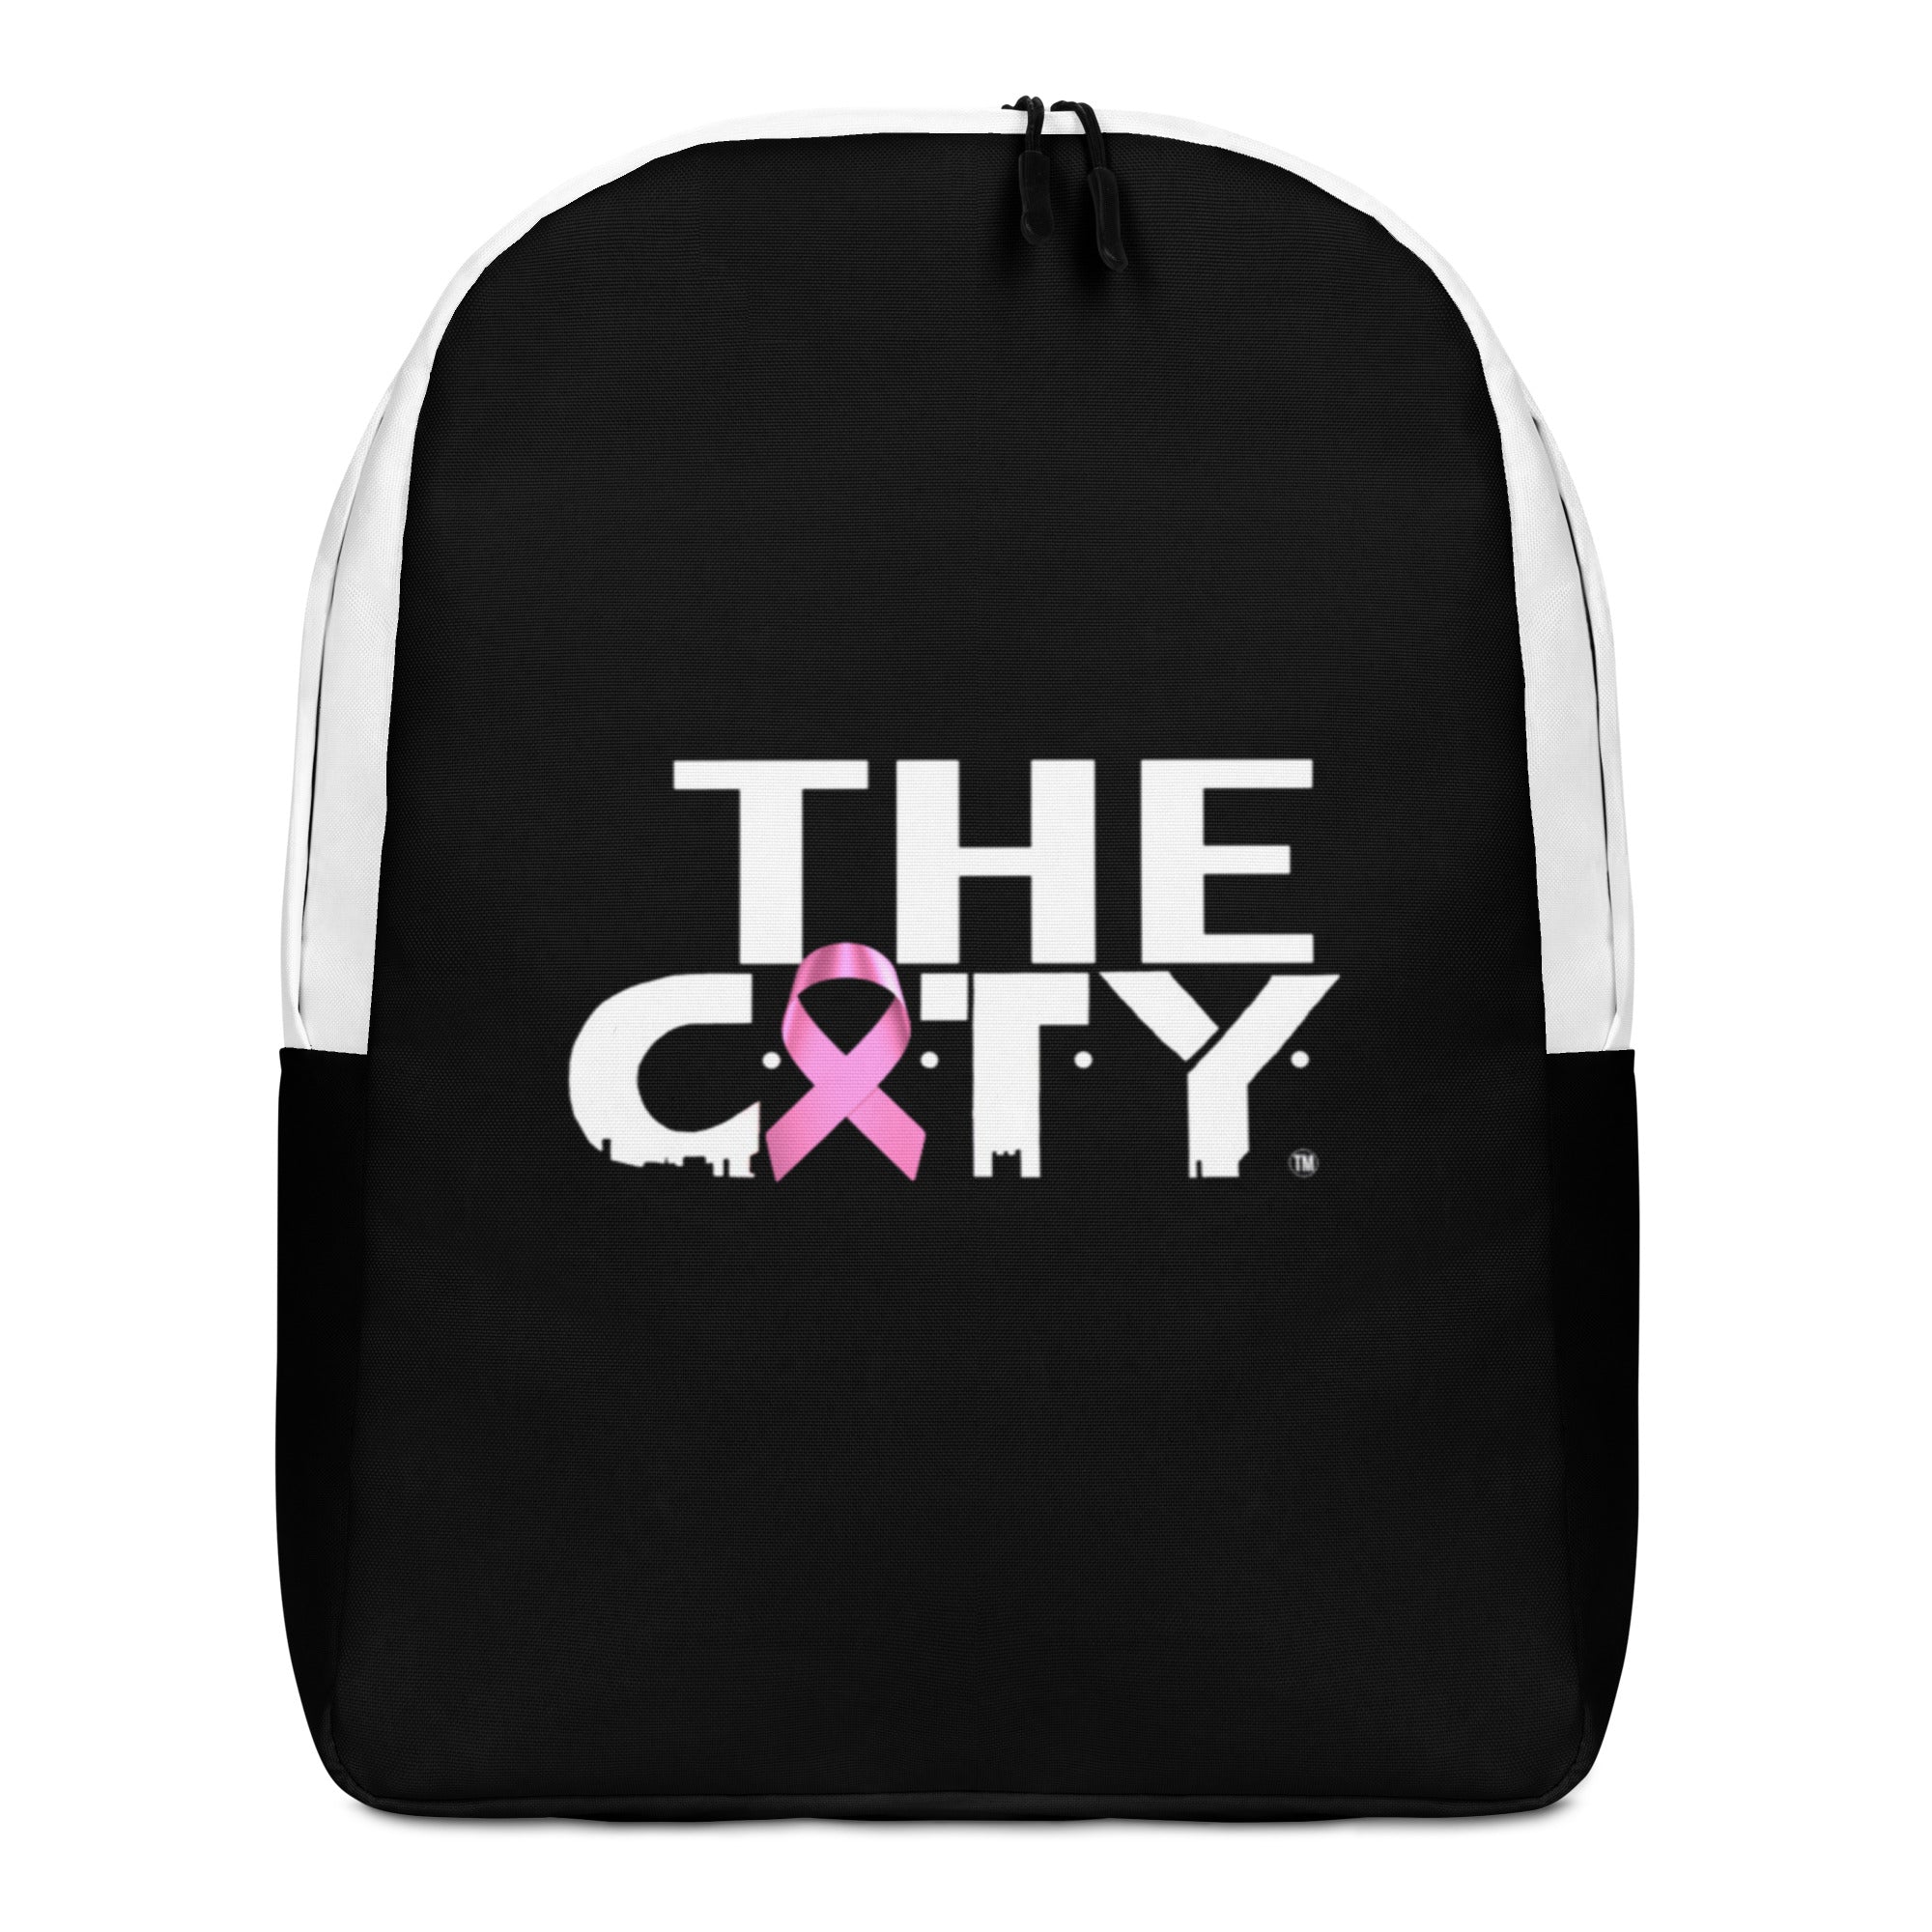 THE C.I.T.Y. Breast Cancer Awareness BLK Minimalist Backpack